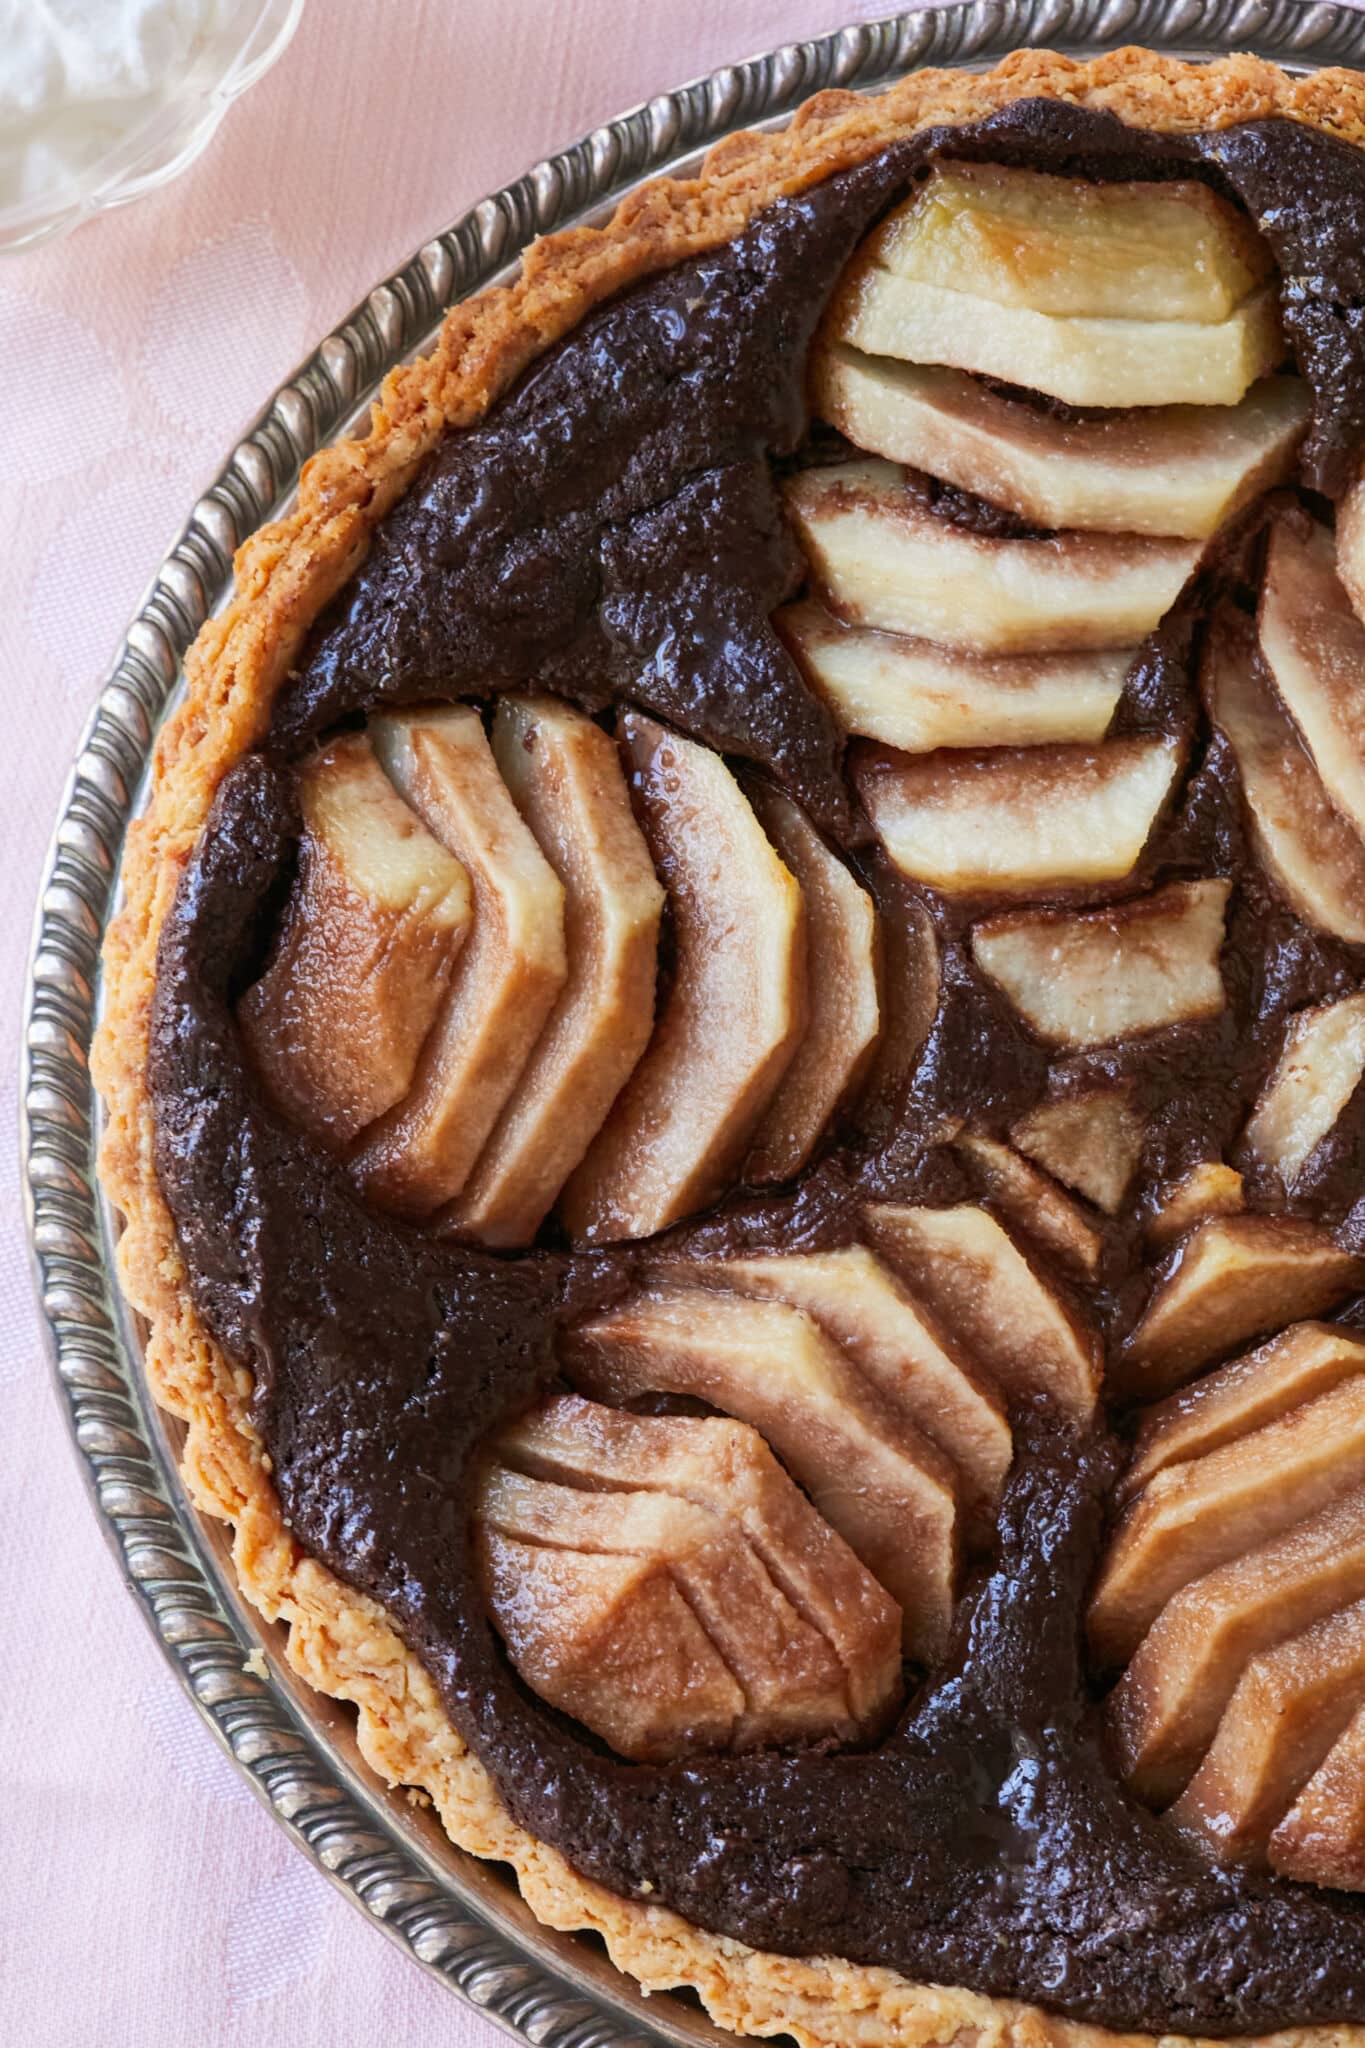 A decadent Pear and Chocolate Frangipane Tart is served on a silver platter. It has golden crispy crust, a lush almond cocoa filling topped with meltingly tender sliced pears. 